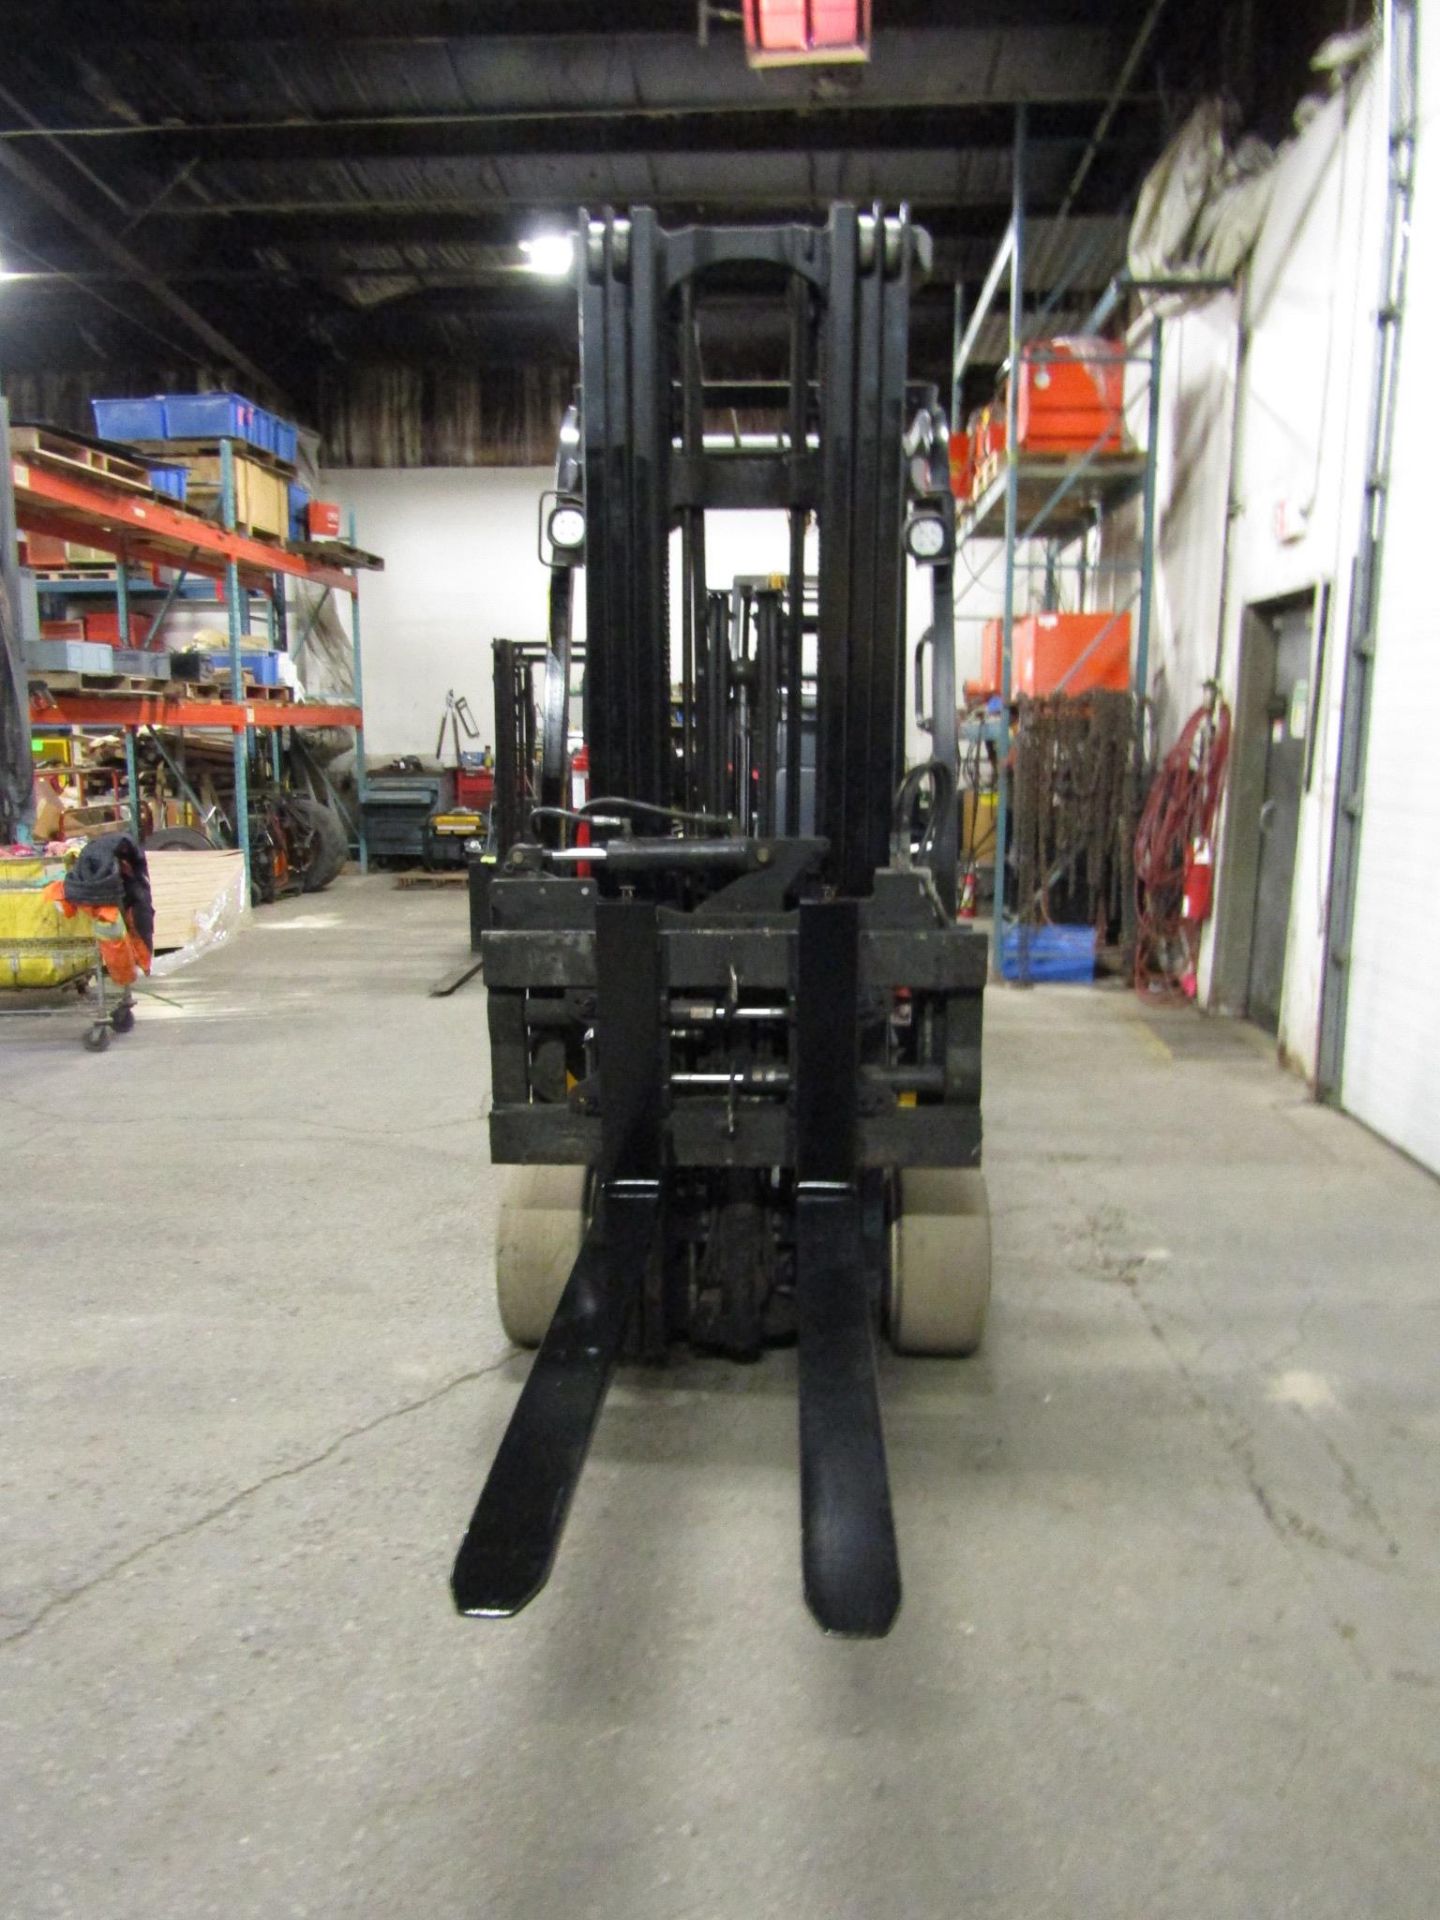 2011 Yale 7000lbs Capacity Forklift with 3-stage mast and sideshift & fork positioner 54" forks - - Image 2 of 2